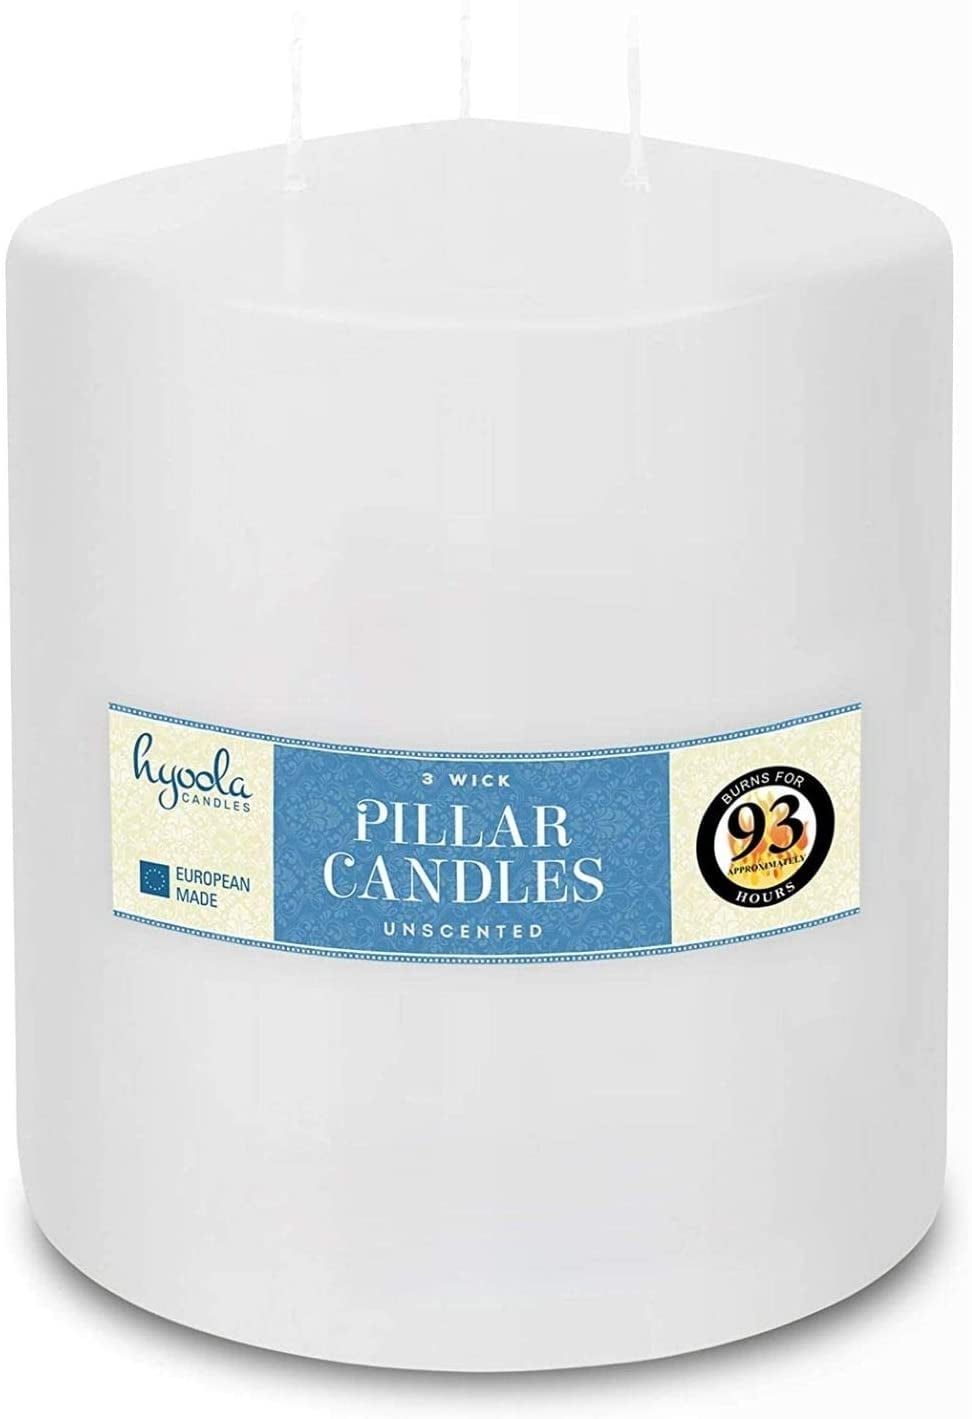 3 Wick Unscented All Natural Pure Vegan Dye Free Soy Wax 6 inches x 8 inches Pillar candle 